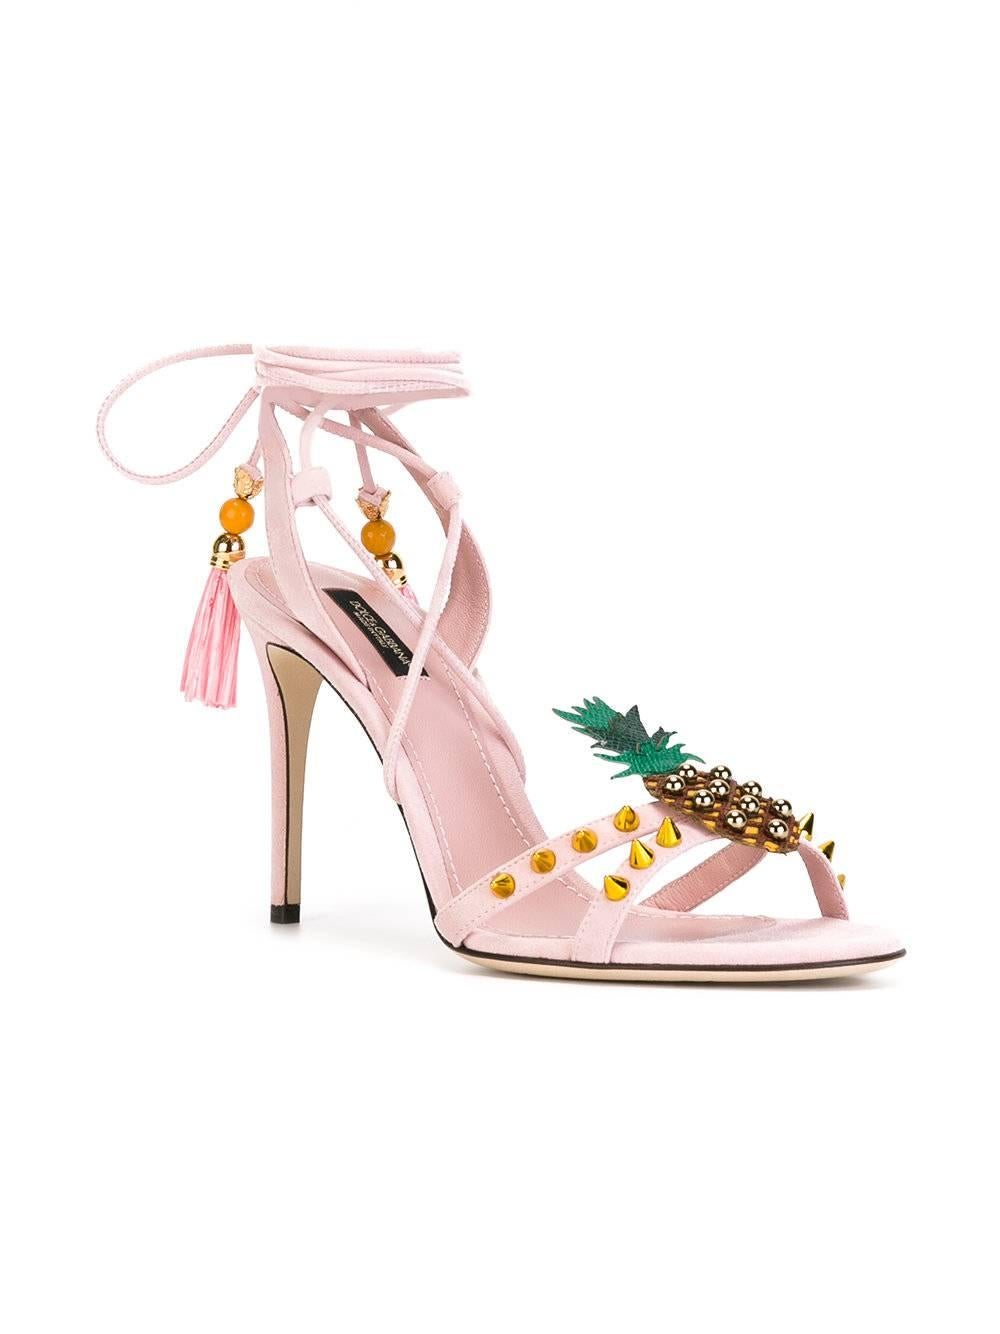 White Dolce & Gabbana New Sold Out Pink Suede Ankle Tie Wrap Heels Sandals in Box